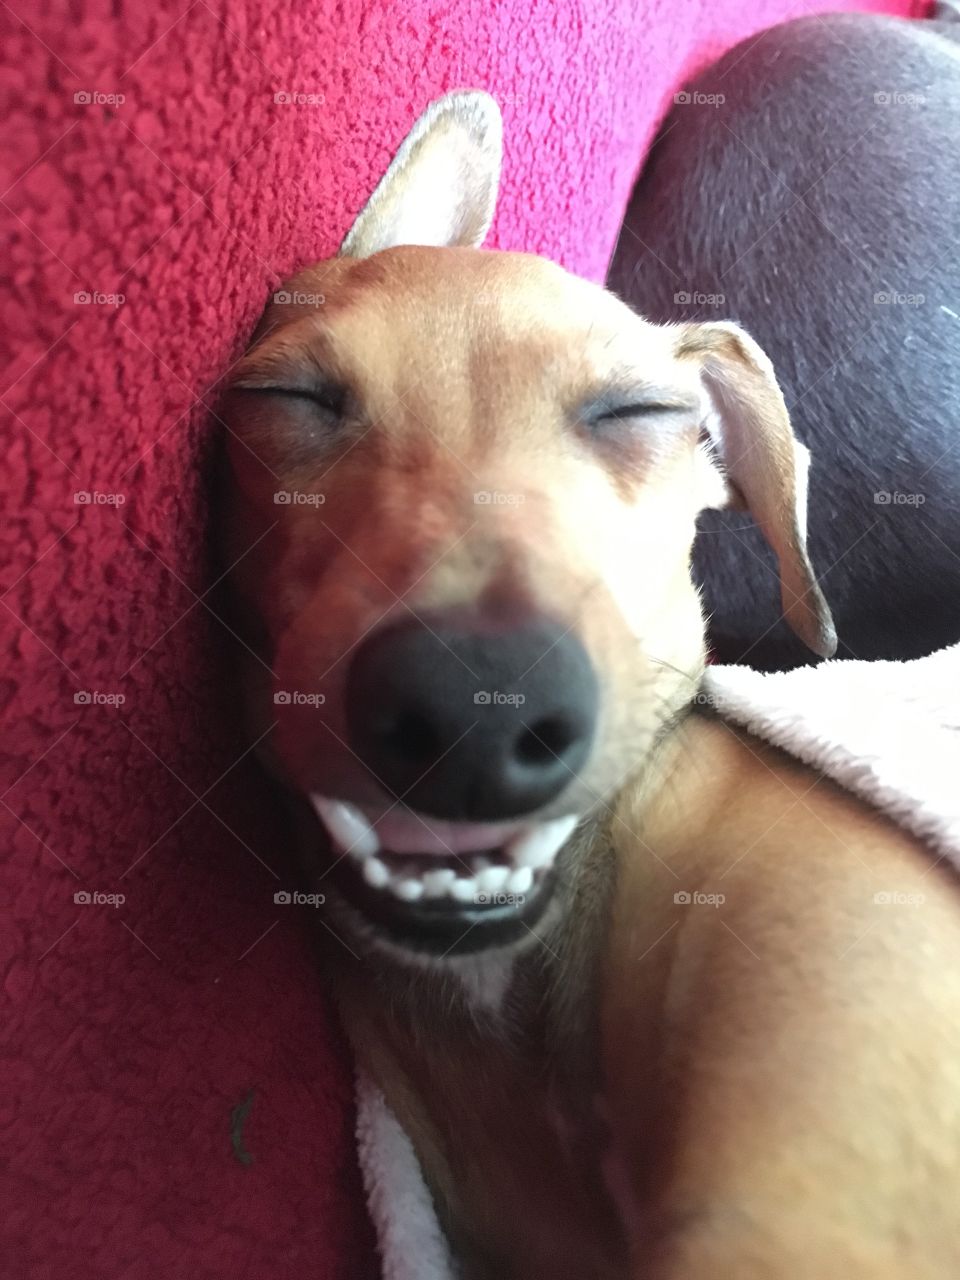 Amber the Italian greyhound puppy smiling while asleep laid on the sofa